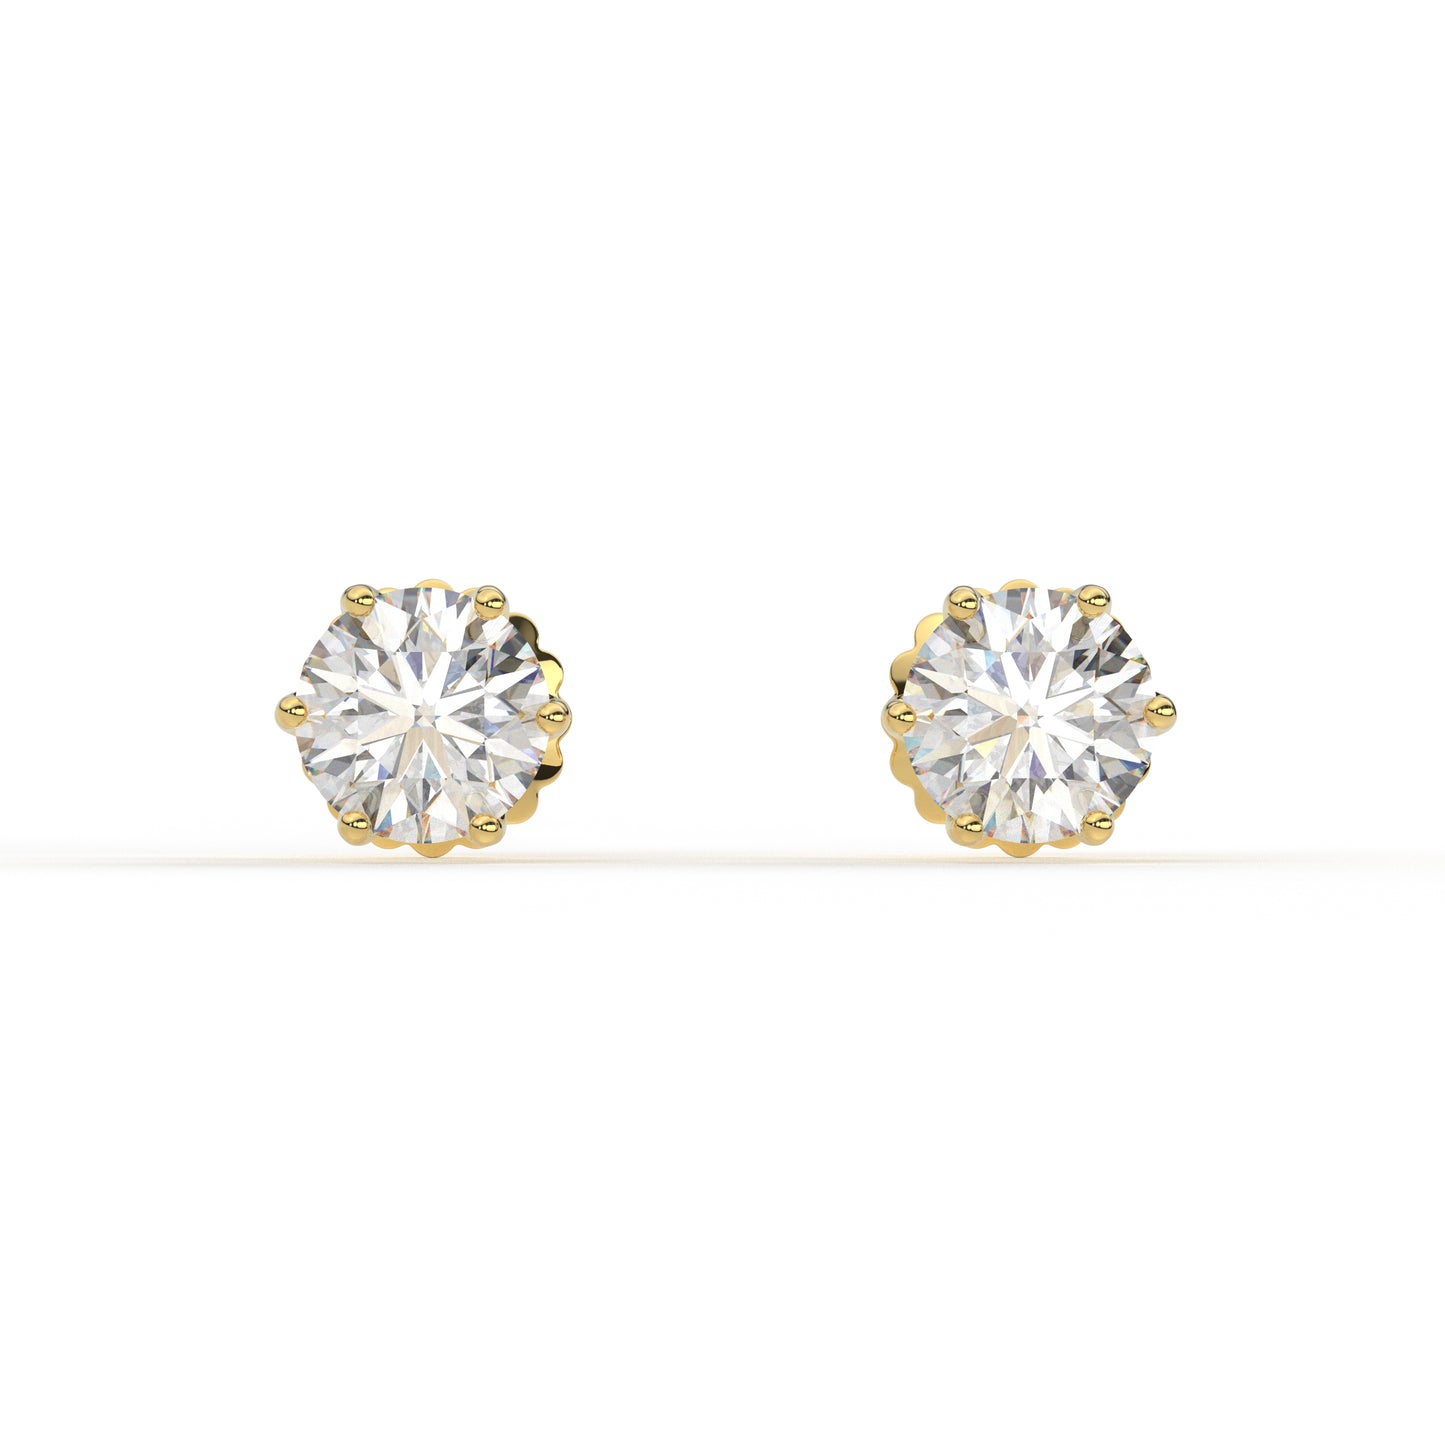 Six Prongs Crown Round Solitaire Earrings